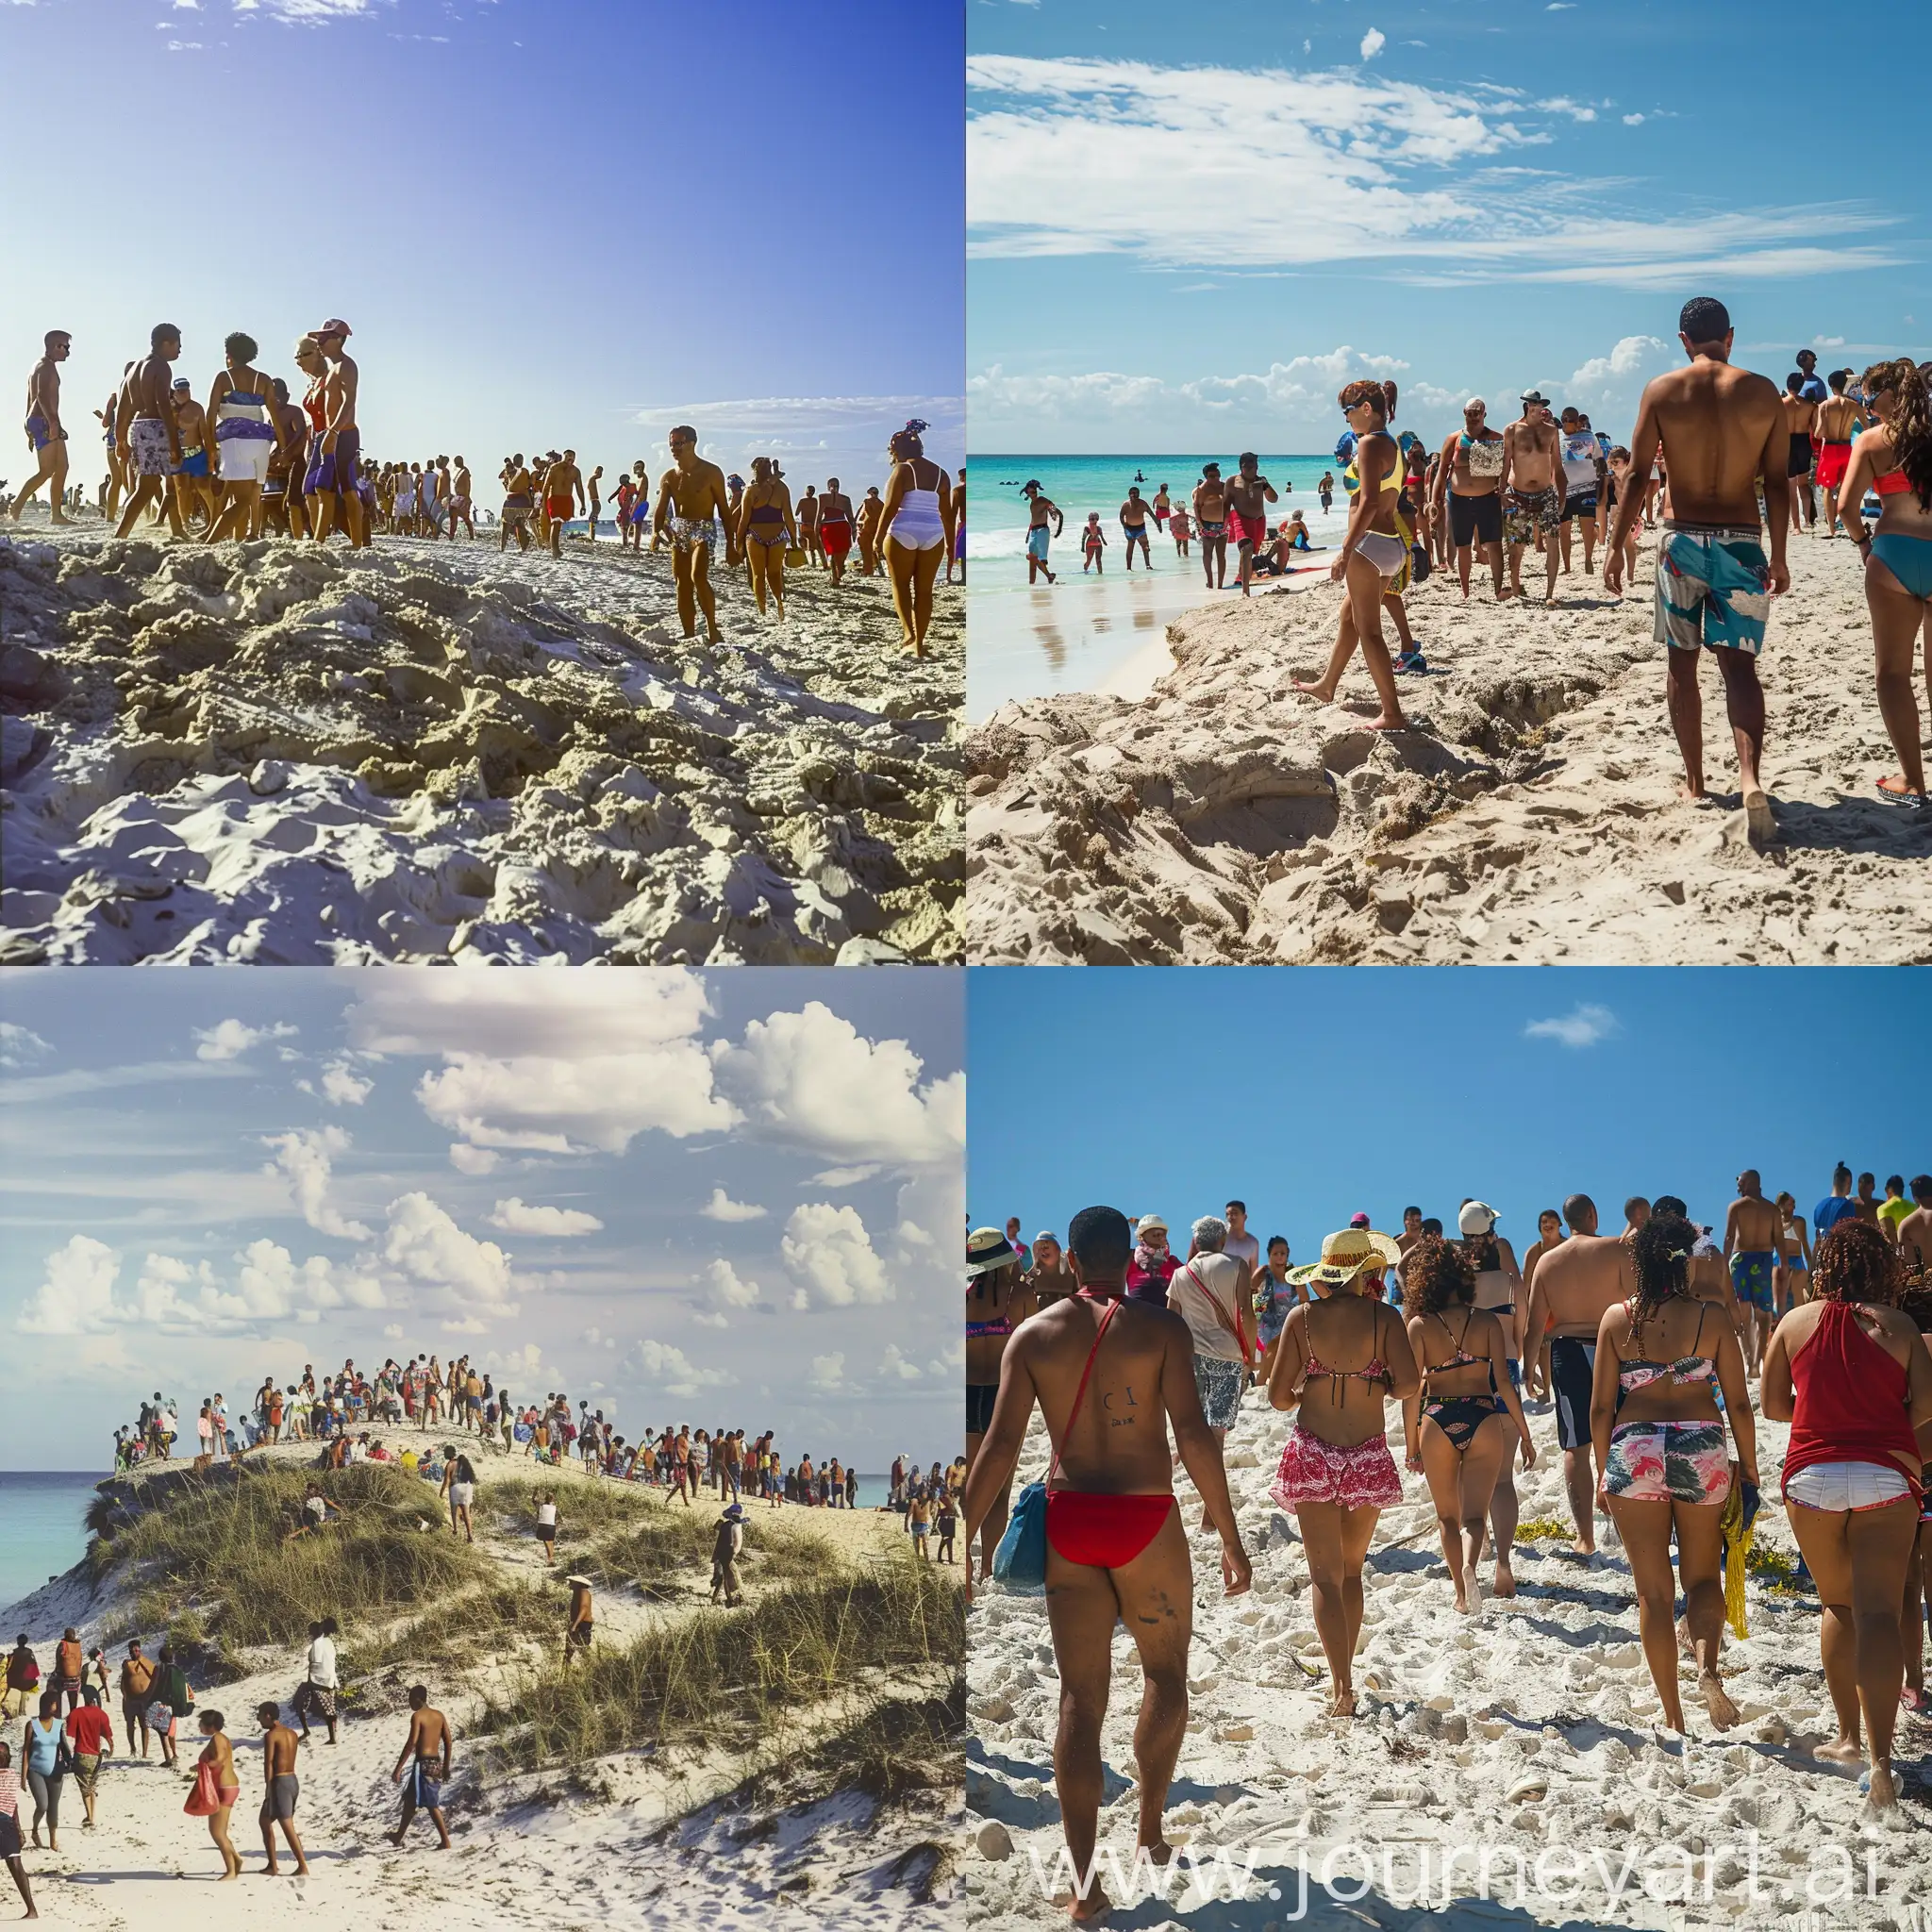 a group of people walking on top of a sandy beach, varadero beach, people in beach, crowded beach, in a beachfront environment, holiday season, happy italian beach scene, the beach, wide image, cuba, jamaica, near the beach, italian beach scene, costa blanca, sandy beach, having a great time, beach in the foreground

